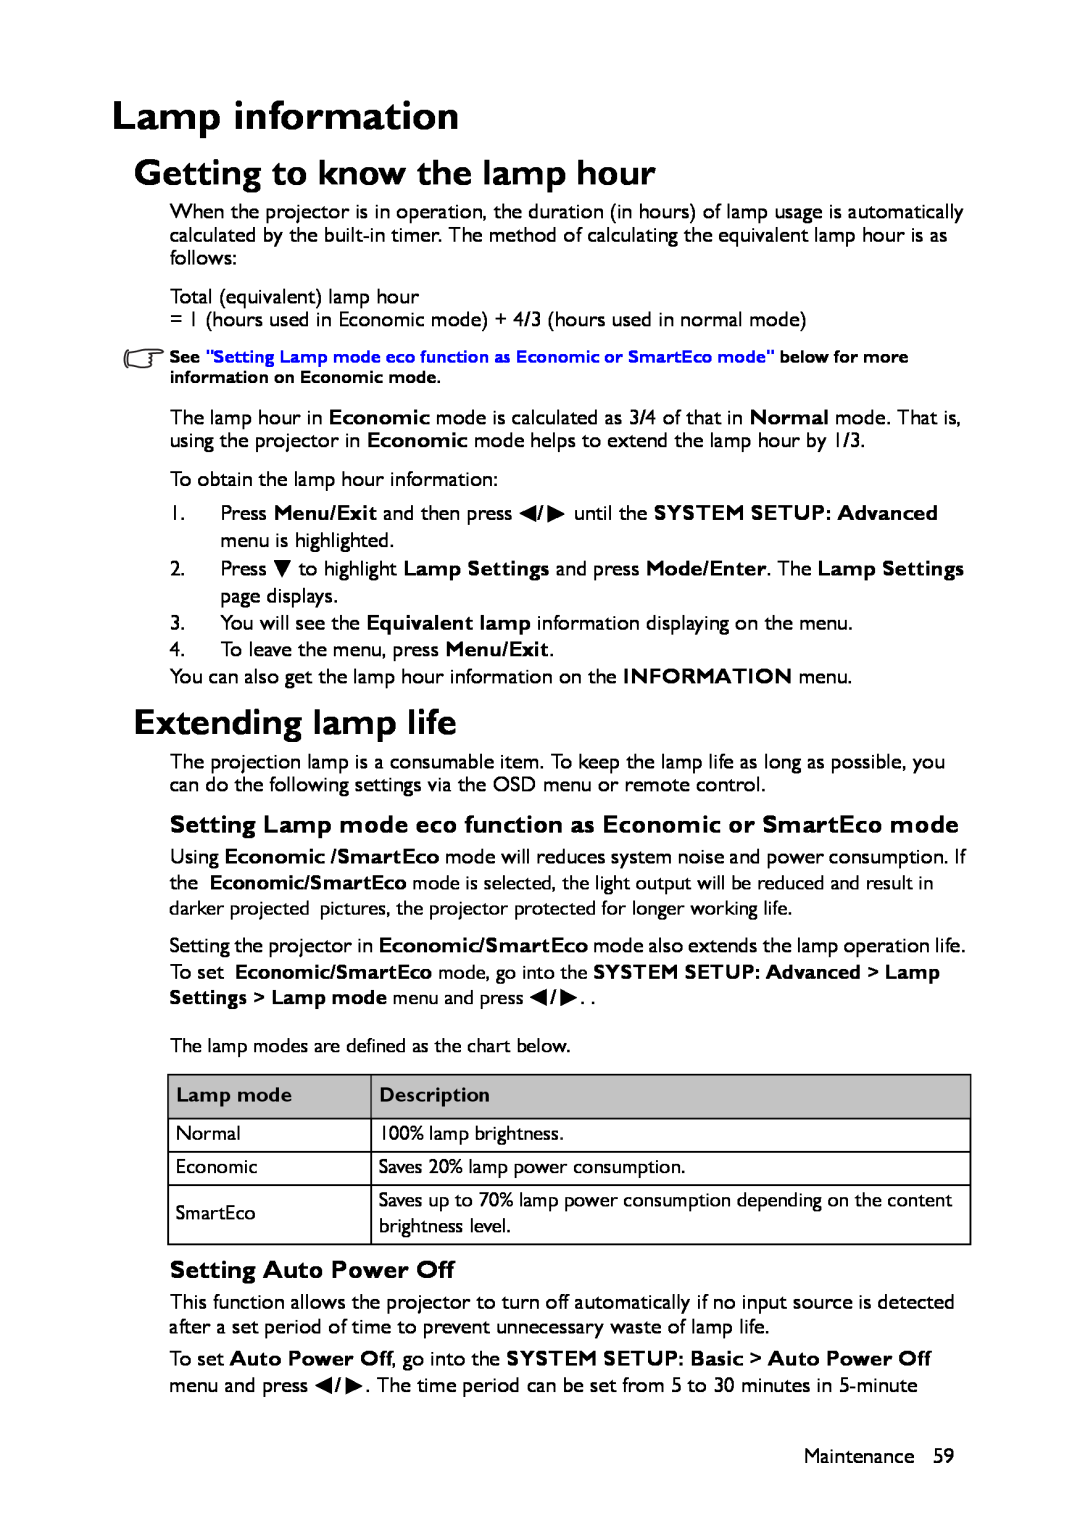 BenQ MS517 user manual Lamp information, Getting to know the lamp hour, Extending lamp life 